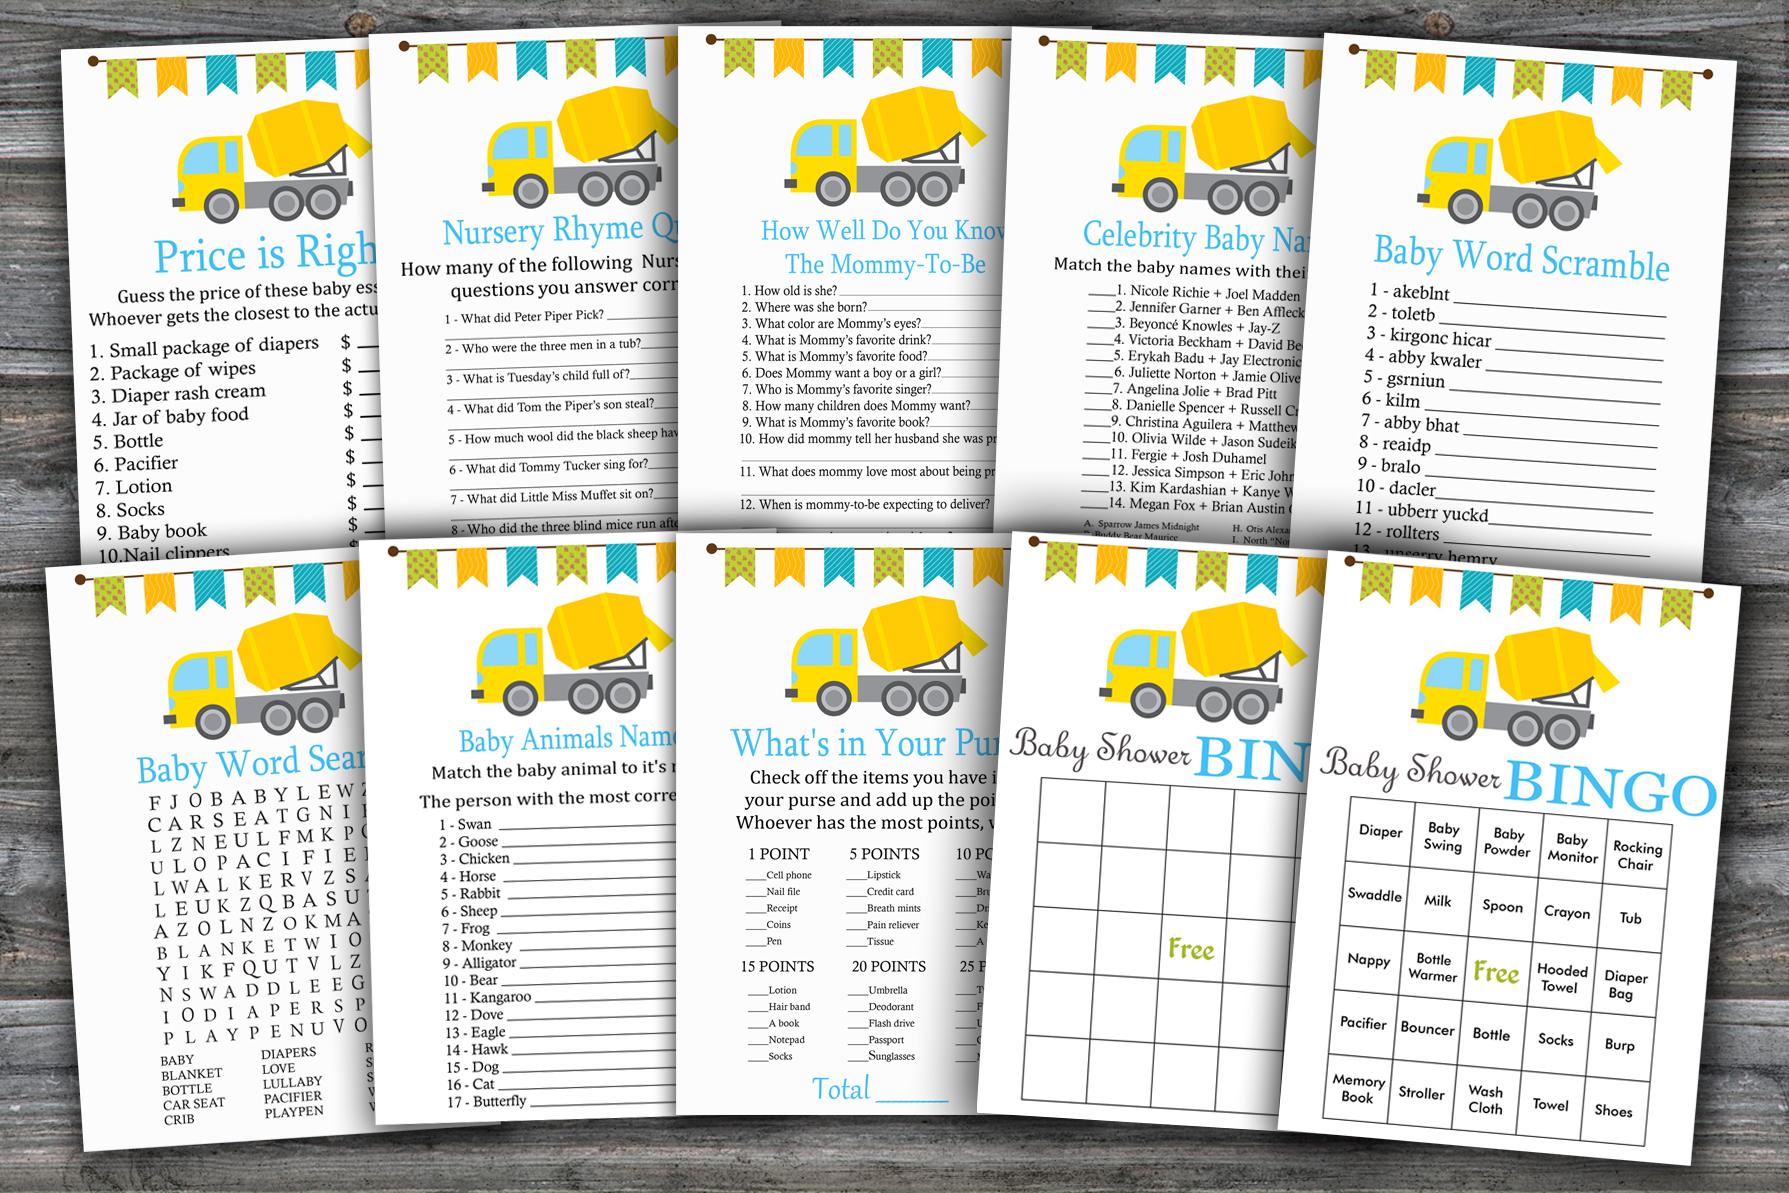 Concrete Mixer Baby Shower Games Package,construction Baby Shower Game Package,9 Printable Games,instant Download-375